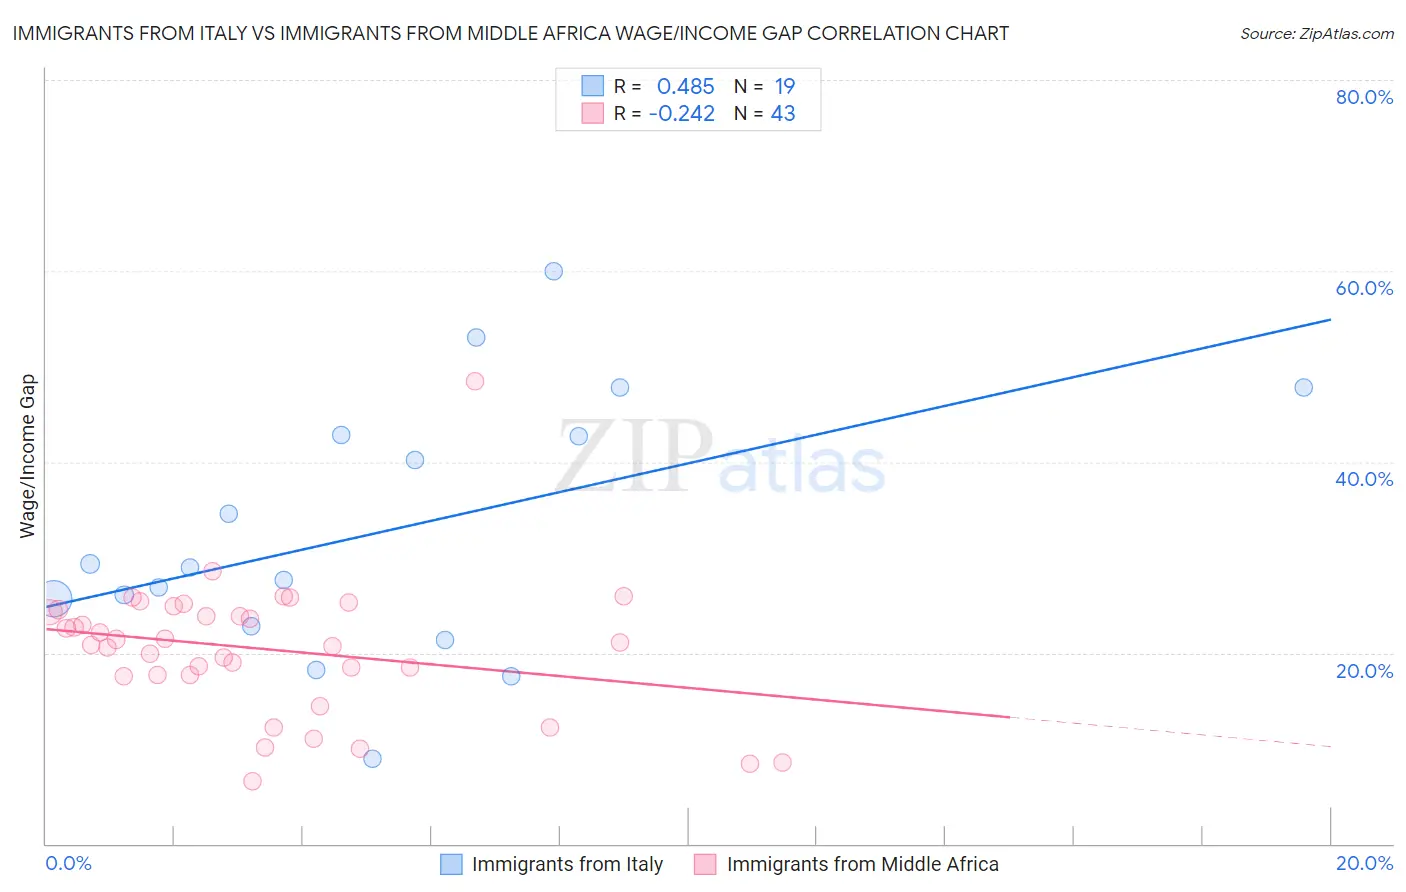 Immigrants from Italy vs Immigrants from Middle Africa Wage/Income Gap